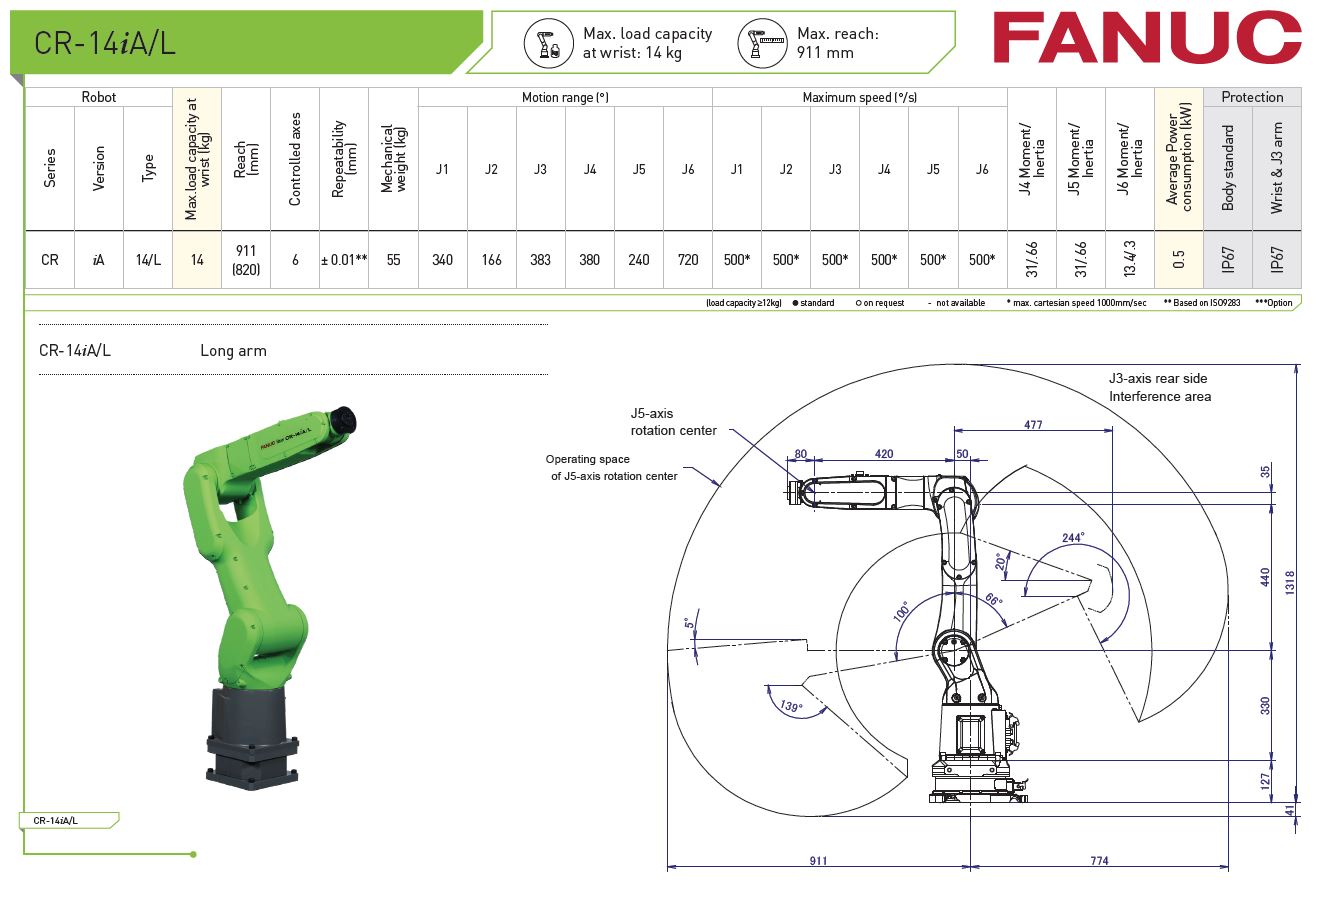 Fanuc Cobot Specifications from RobotWorld